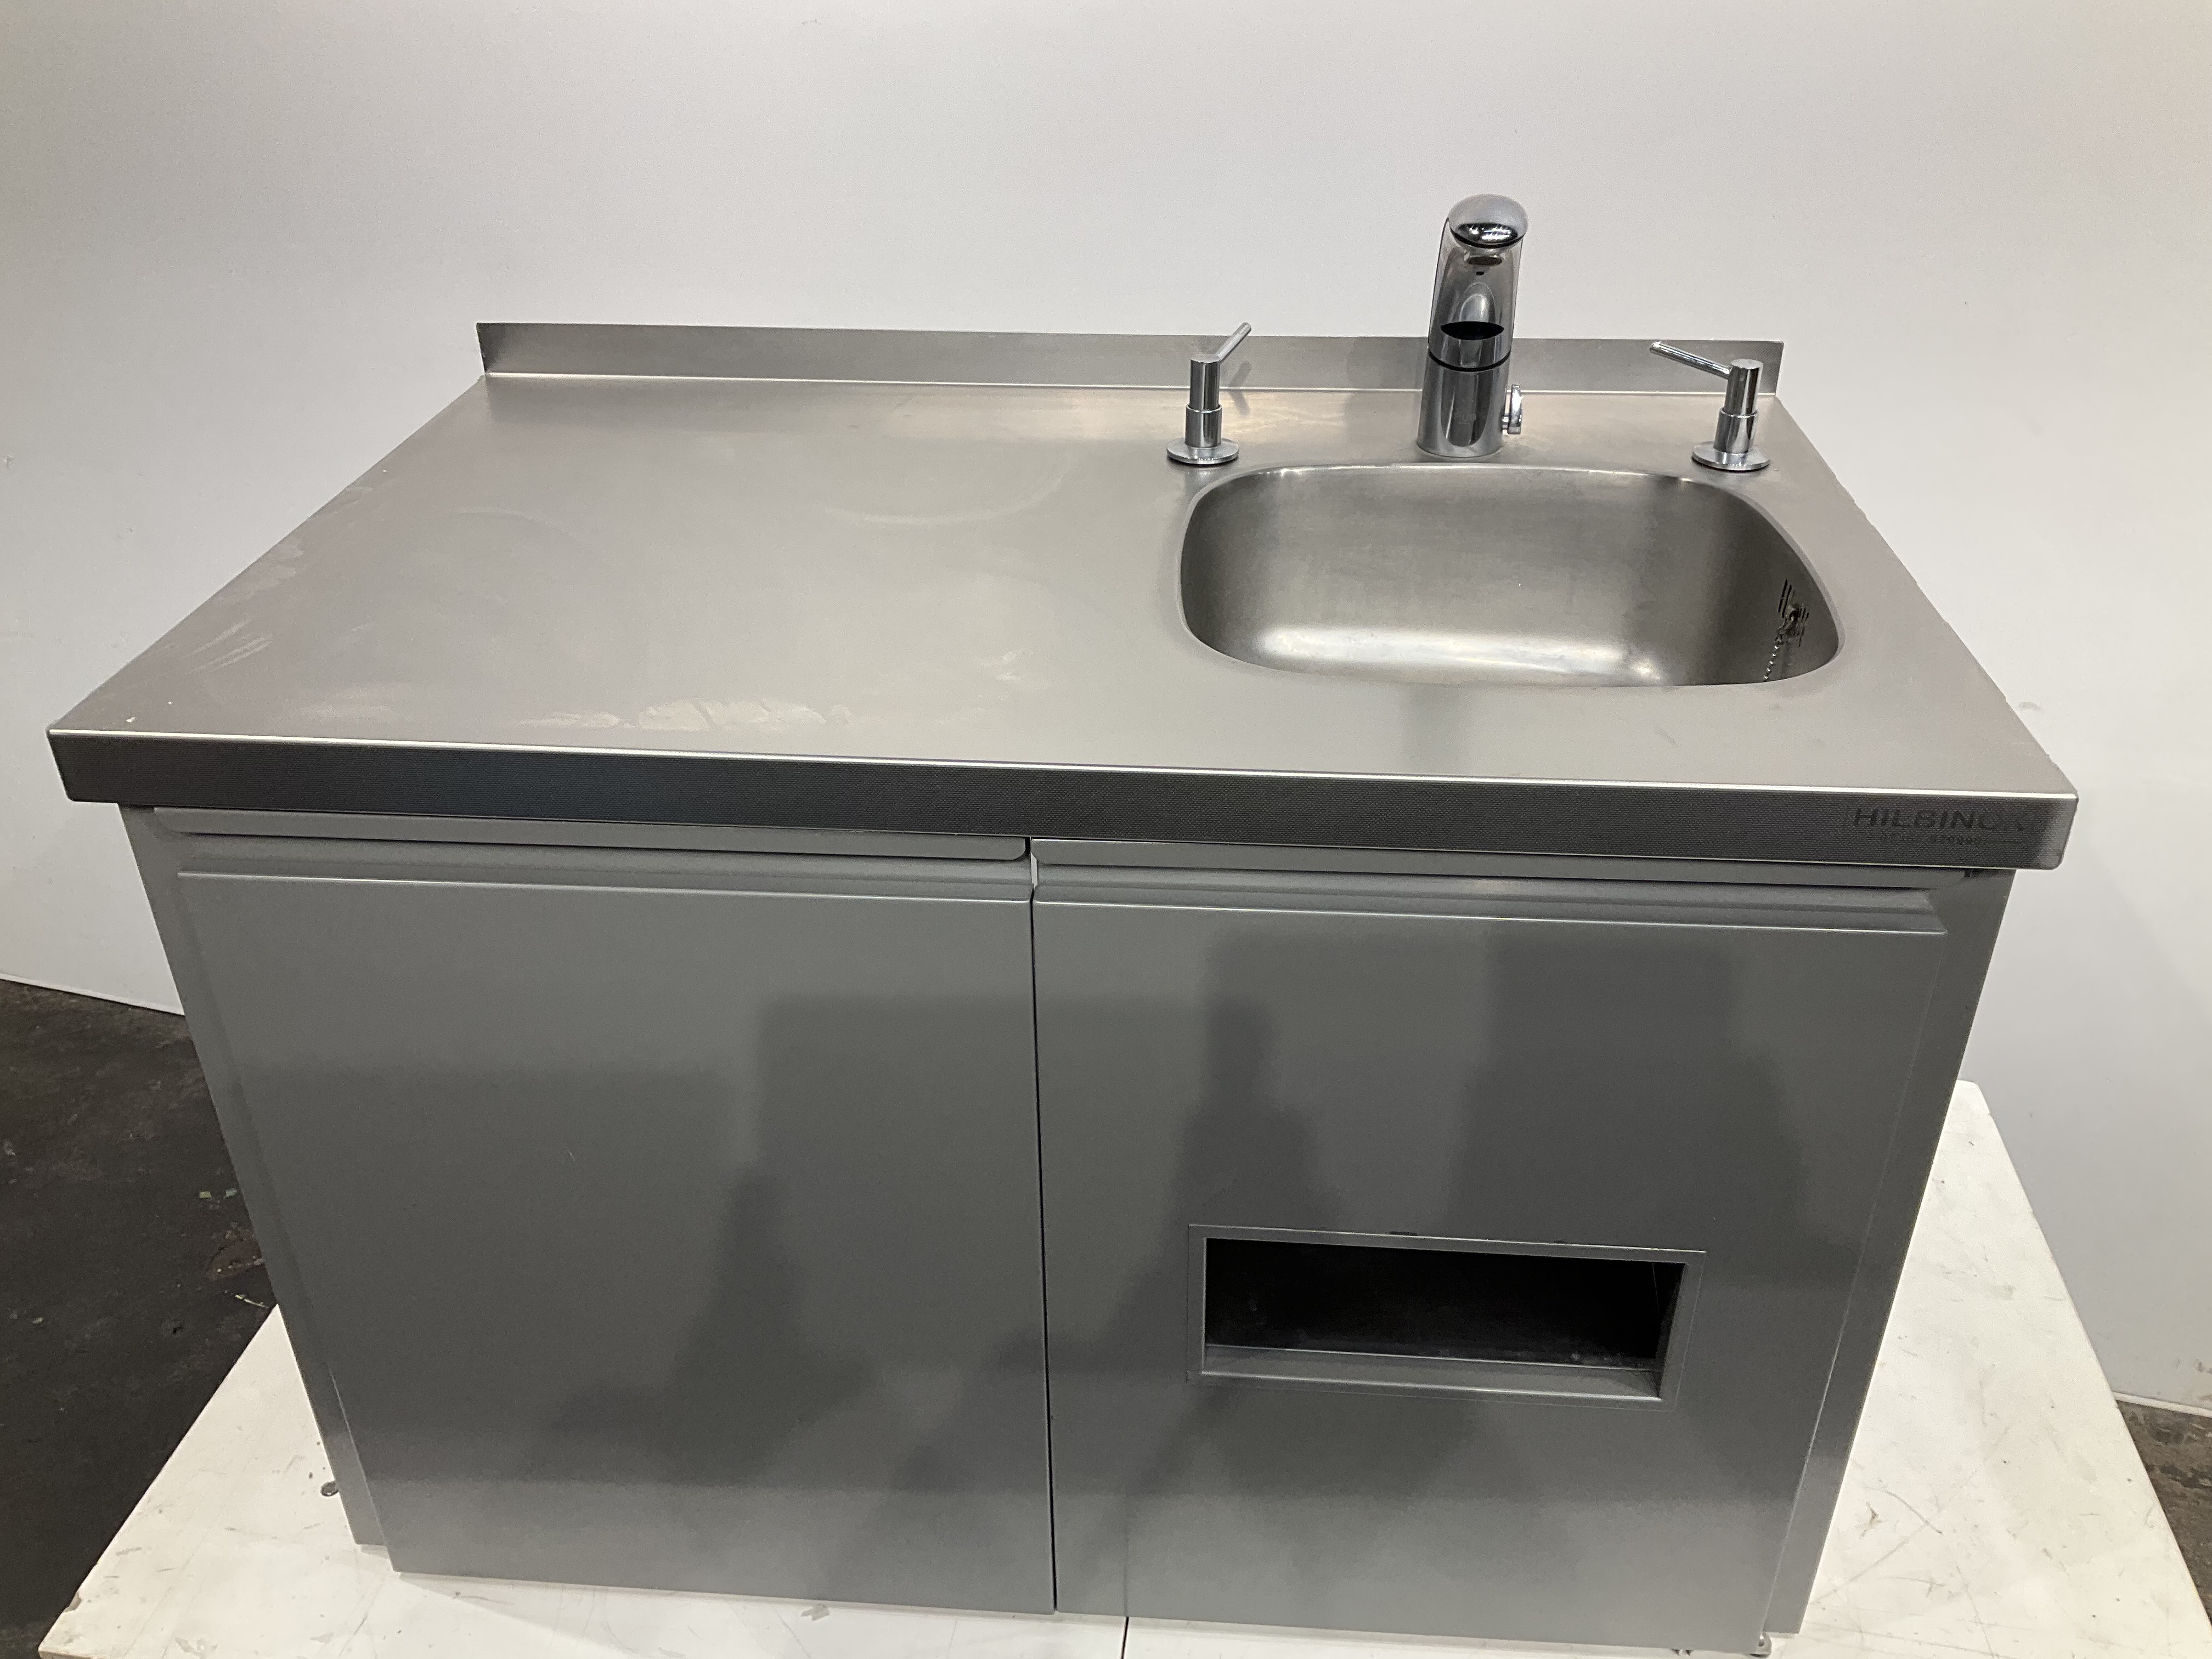 Stainless steel sink / sink made of stainless steel, used